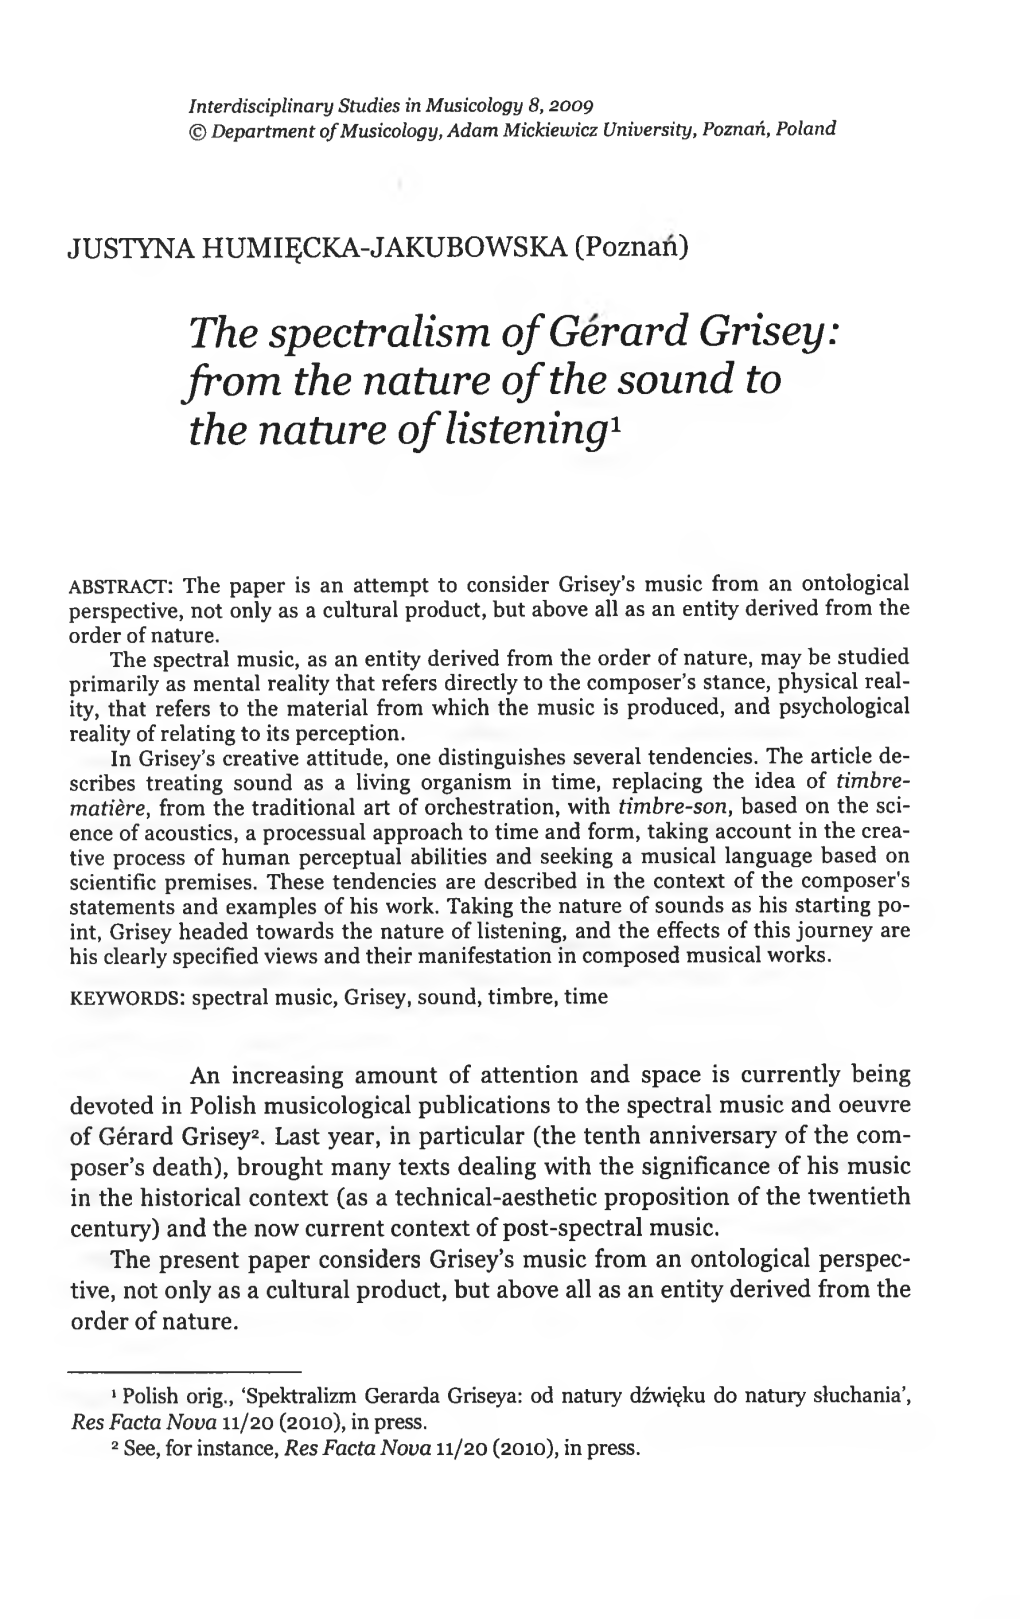 The Spectralism of Gerard Grisey: from the Nature of the Sound to the Nature of Listening1